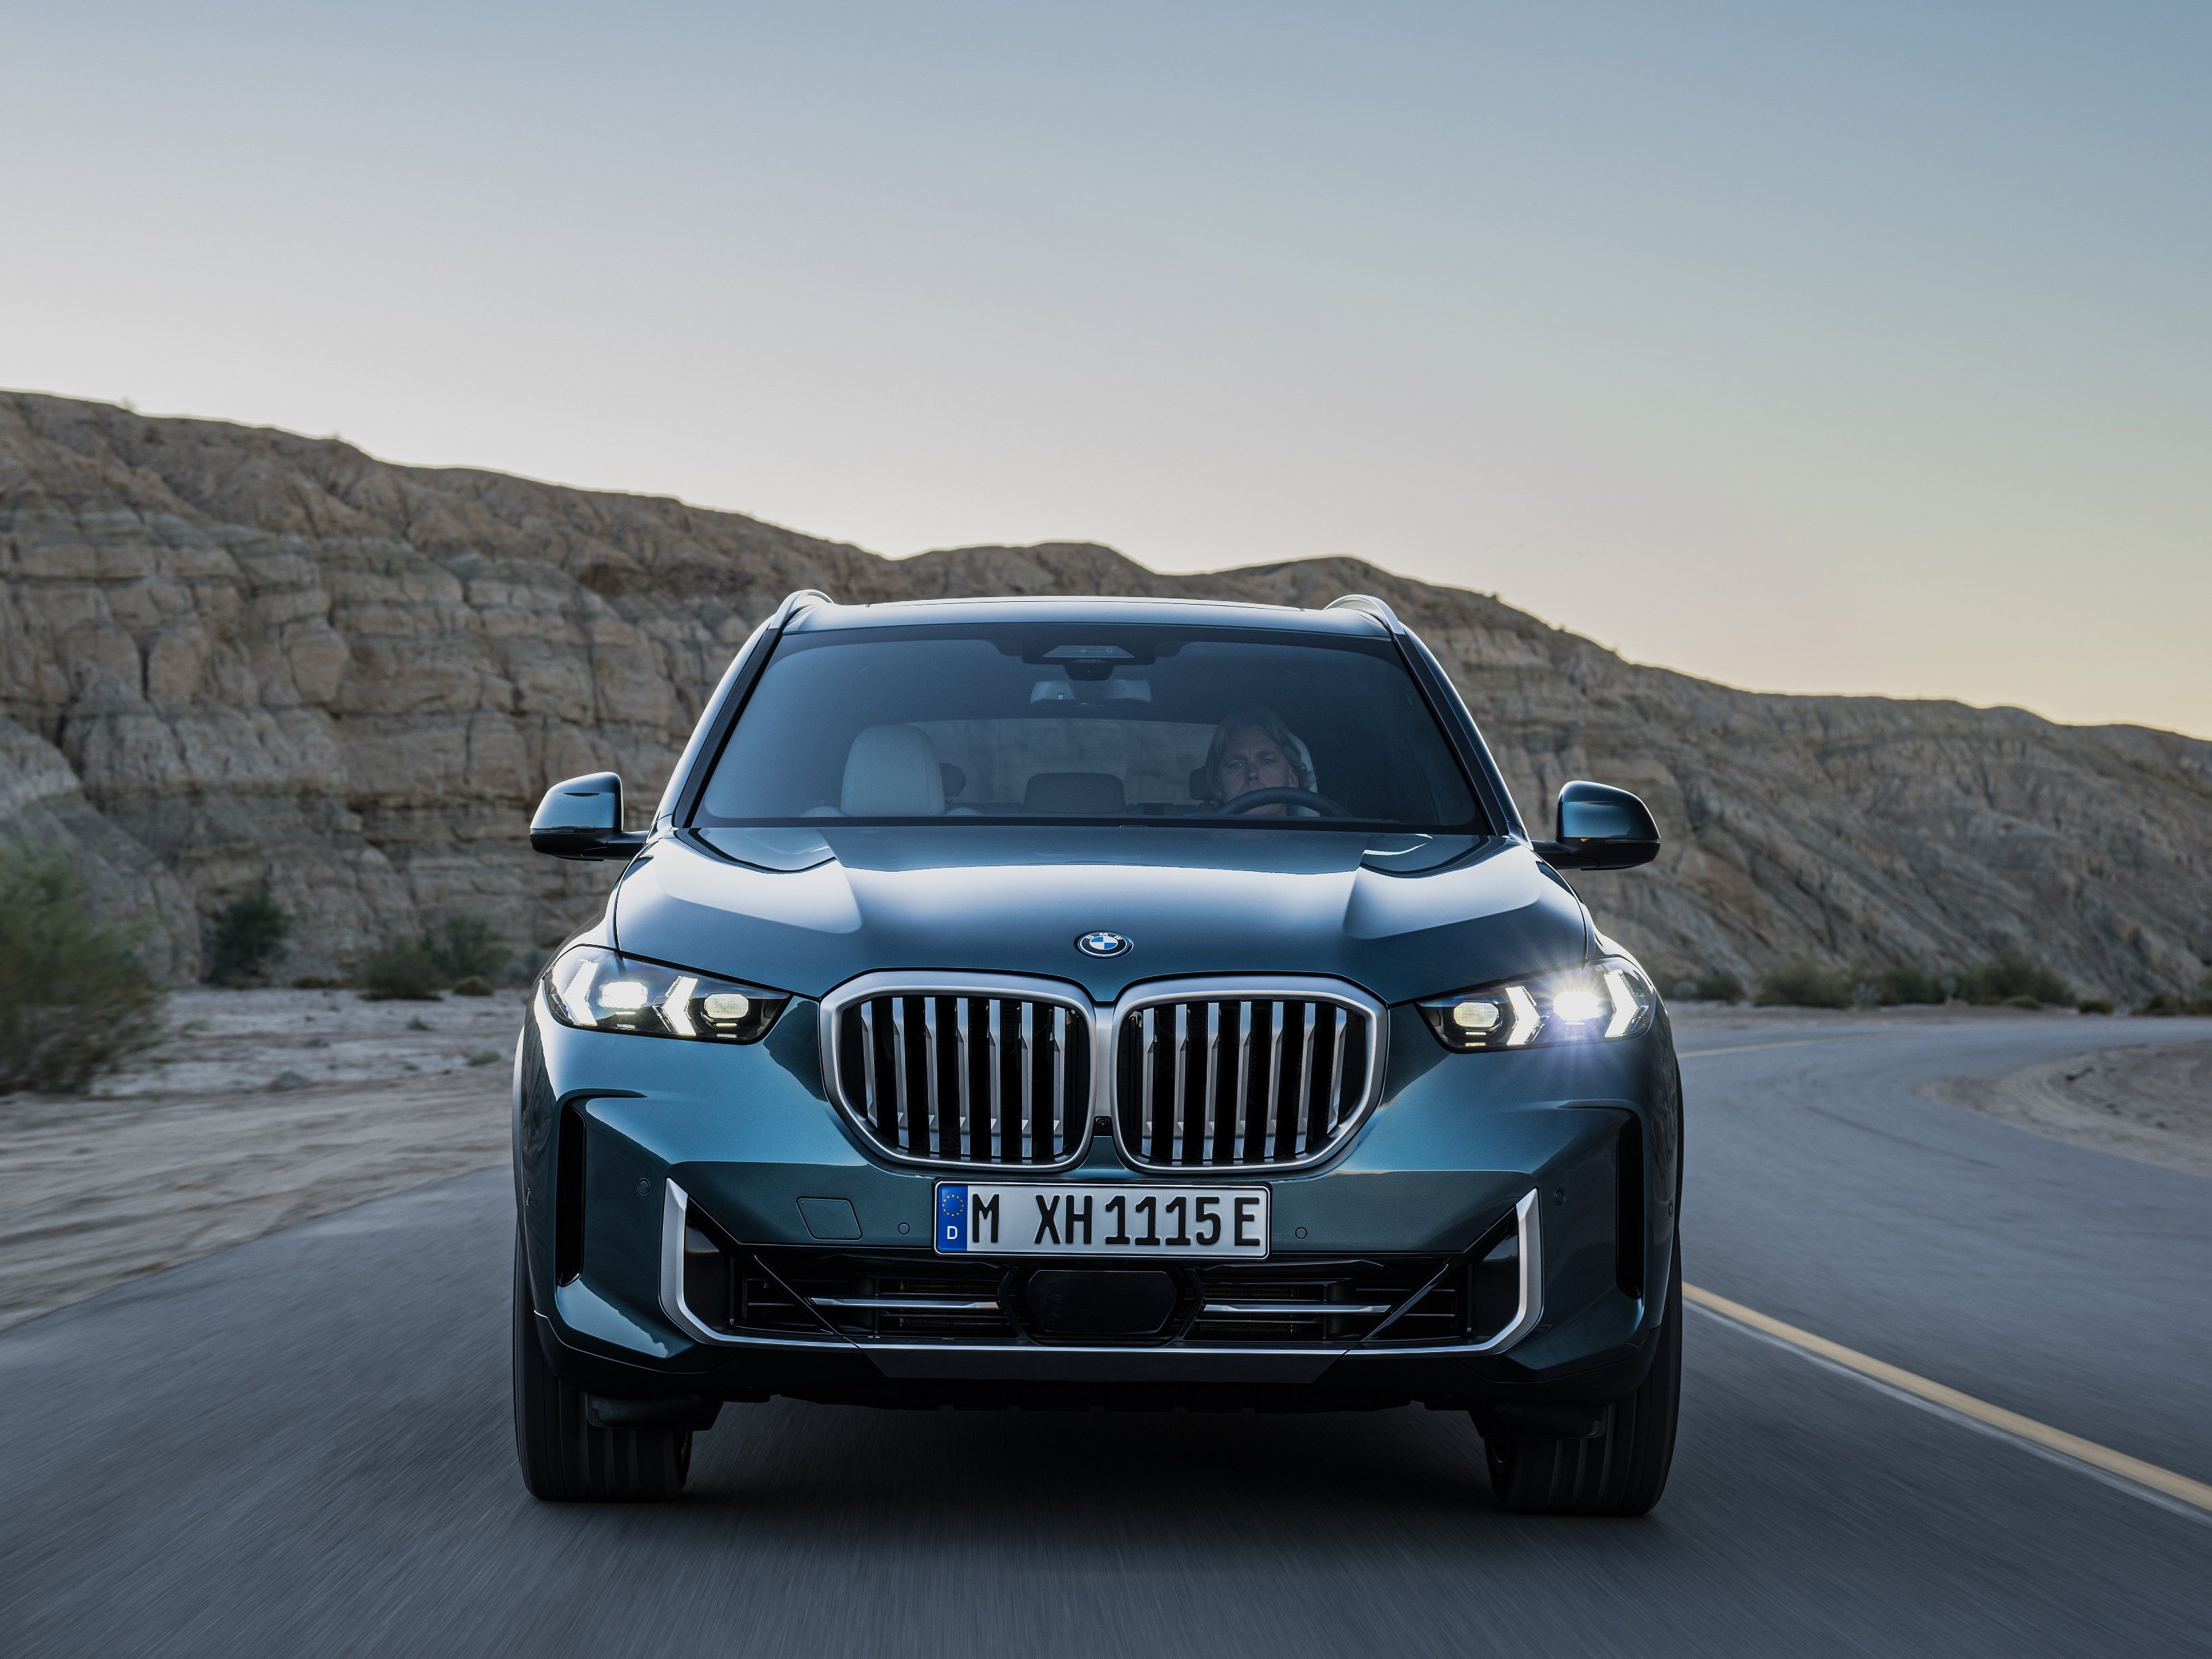 BMW X5 price in India, Z4 facelift launch date, option list and more